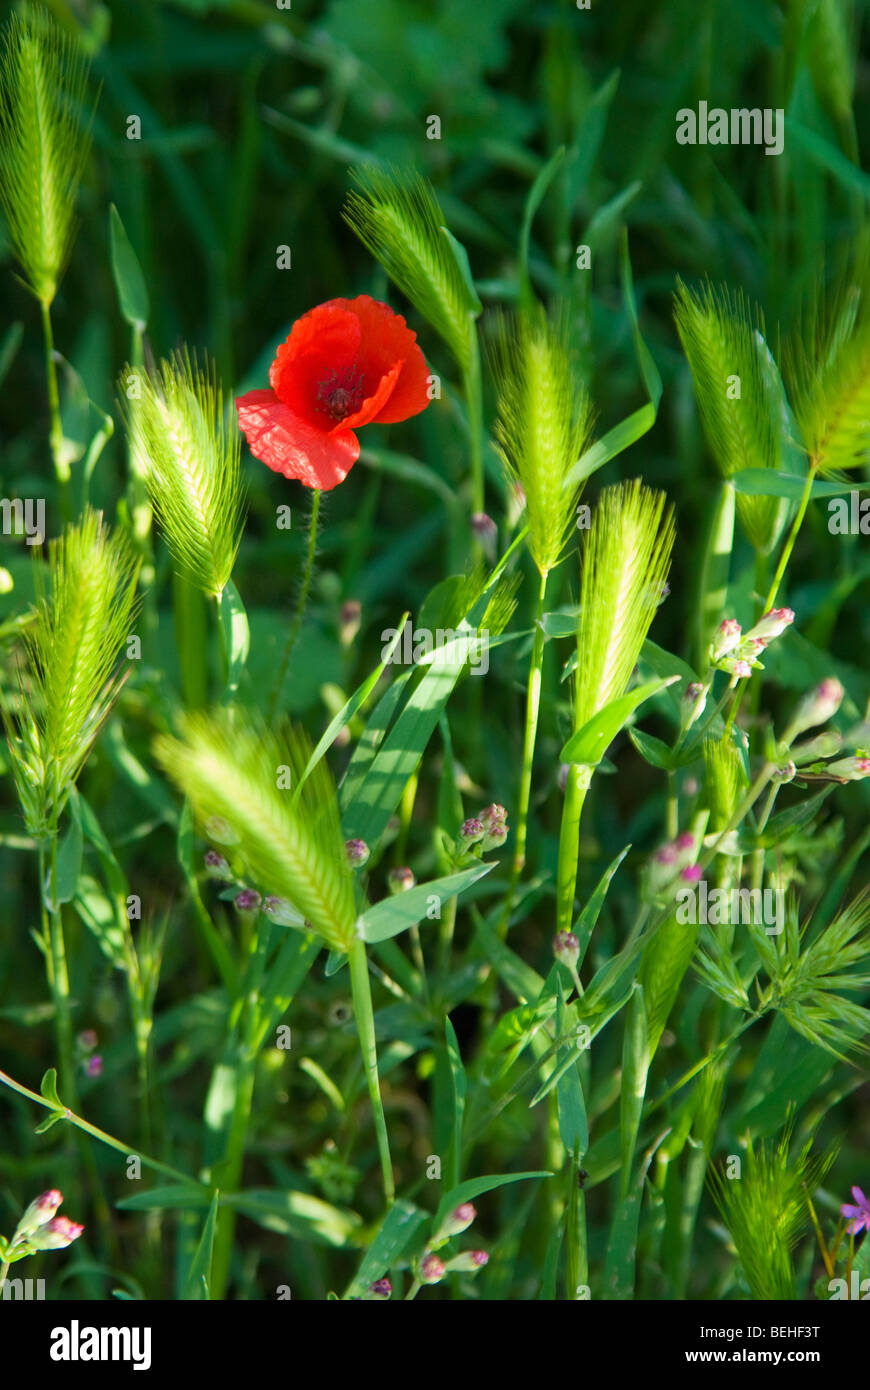 Vertical Images of a Spanish Poppy surrounded by wild grasses Stock Photo